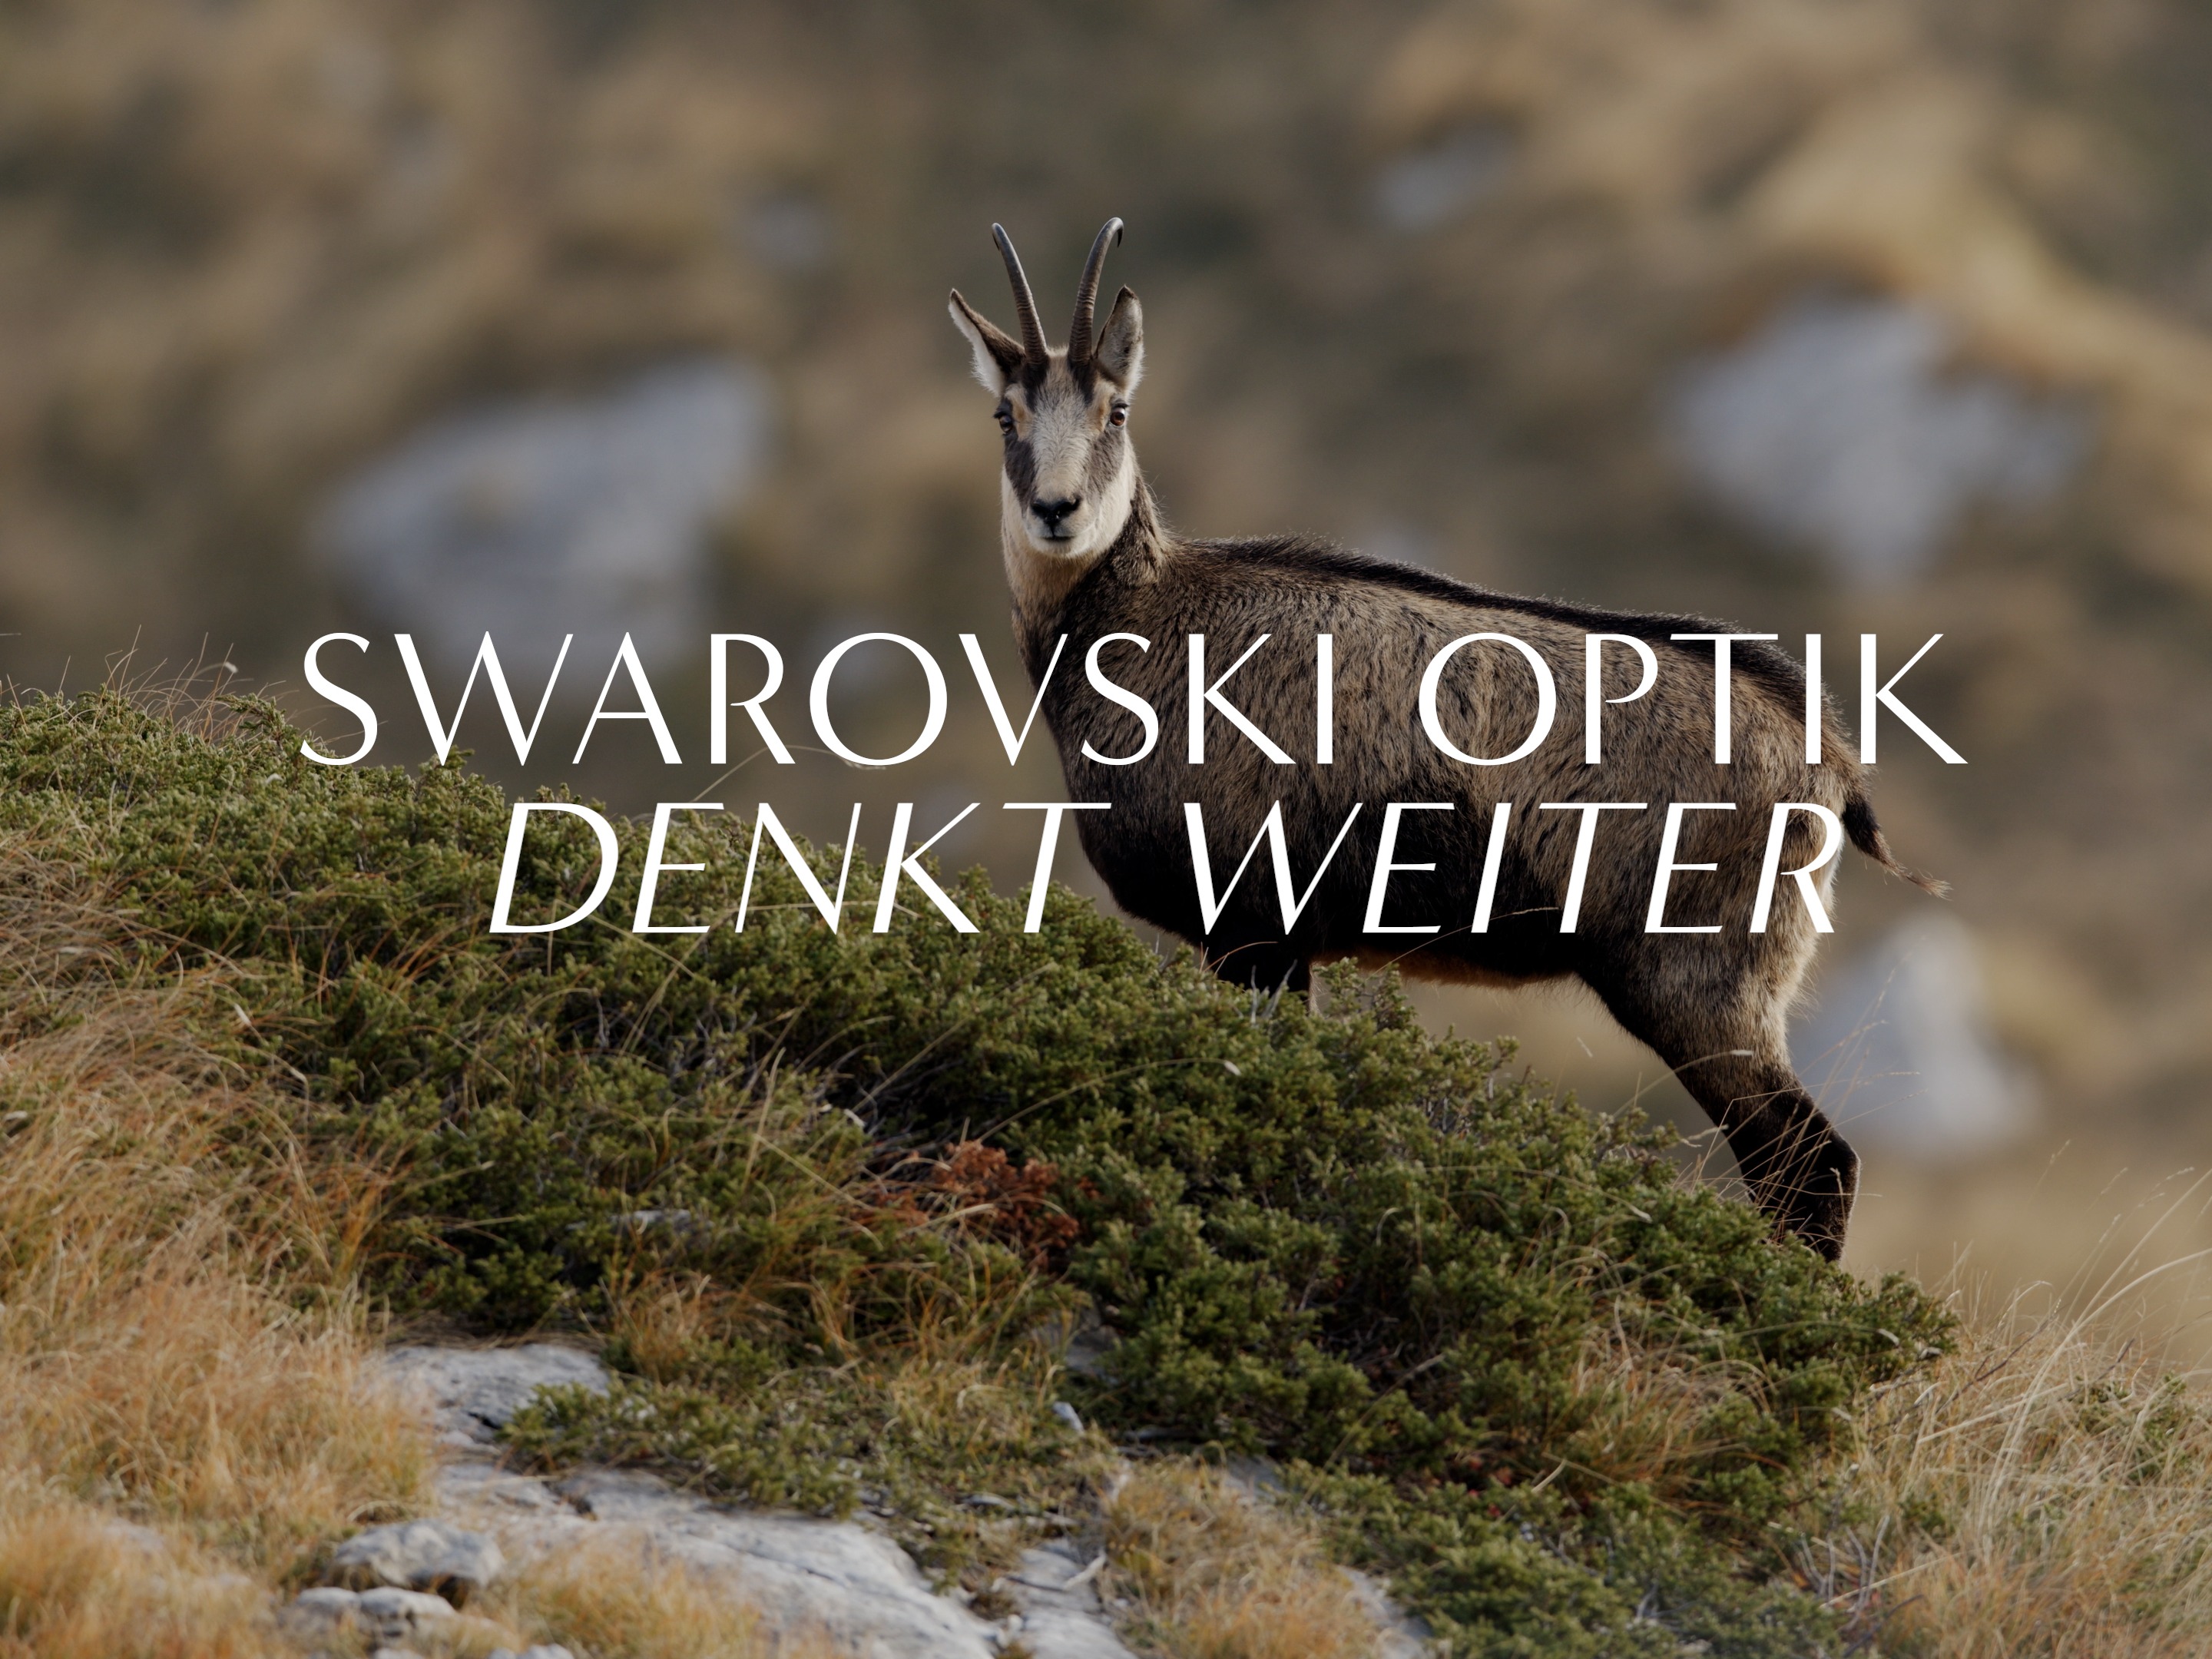 Learn more about how SWAROVSKI OPTIK invented the EL Range, binoculars that precisely measure distance and angle.